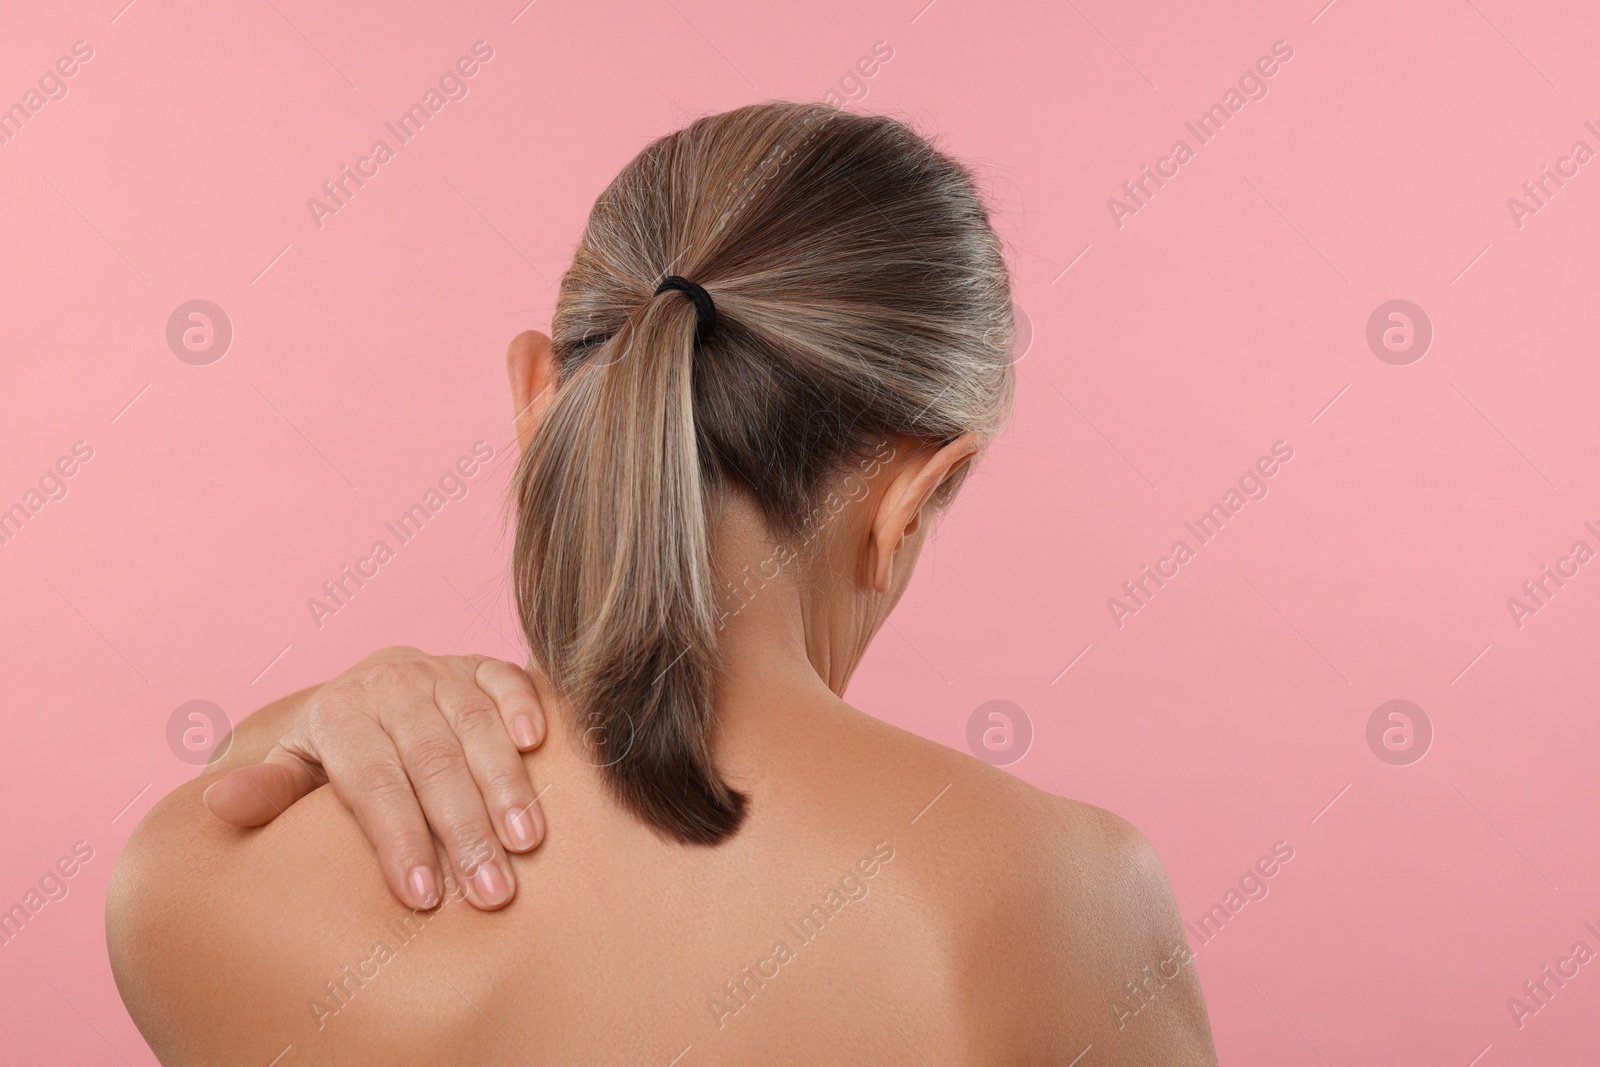 Photo of Woman suffering from pain in her neck on pink background, back view